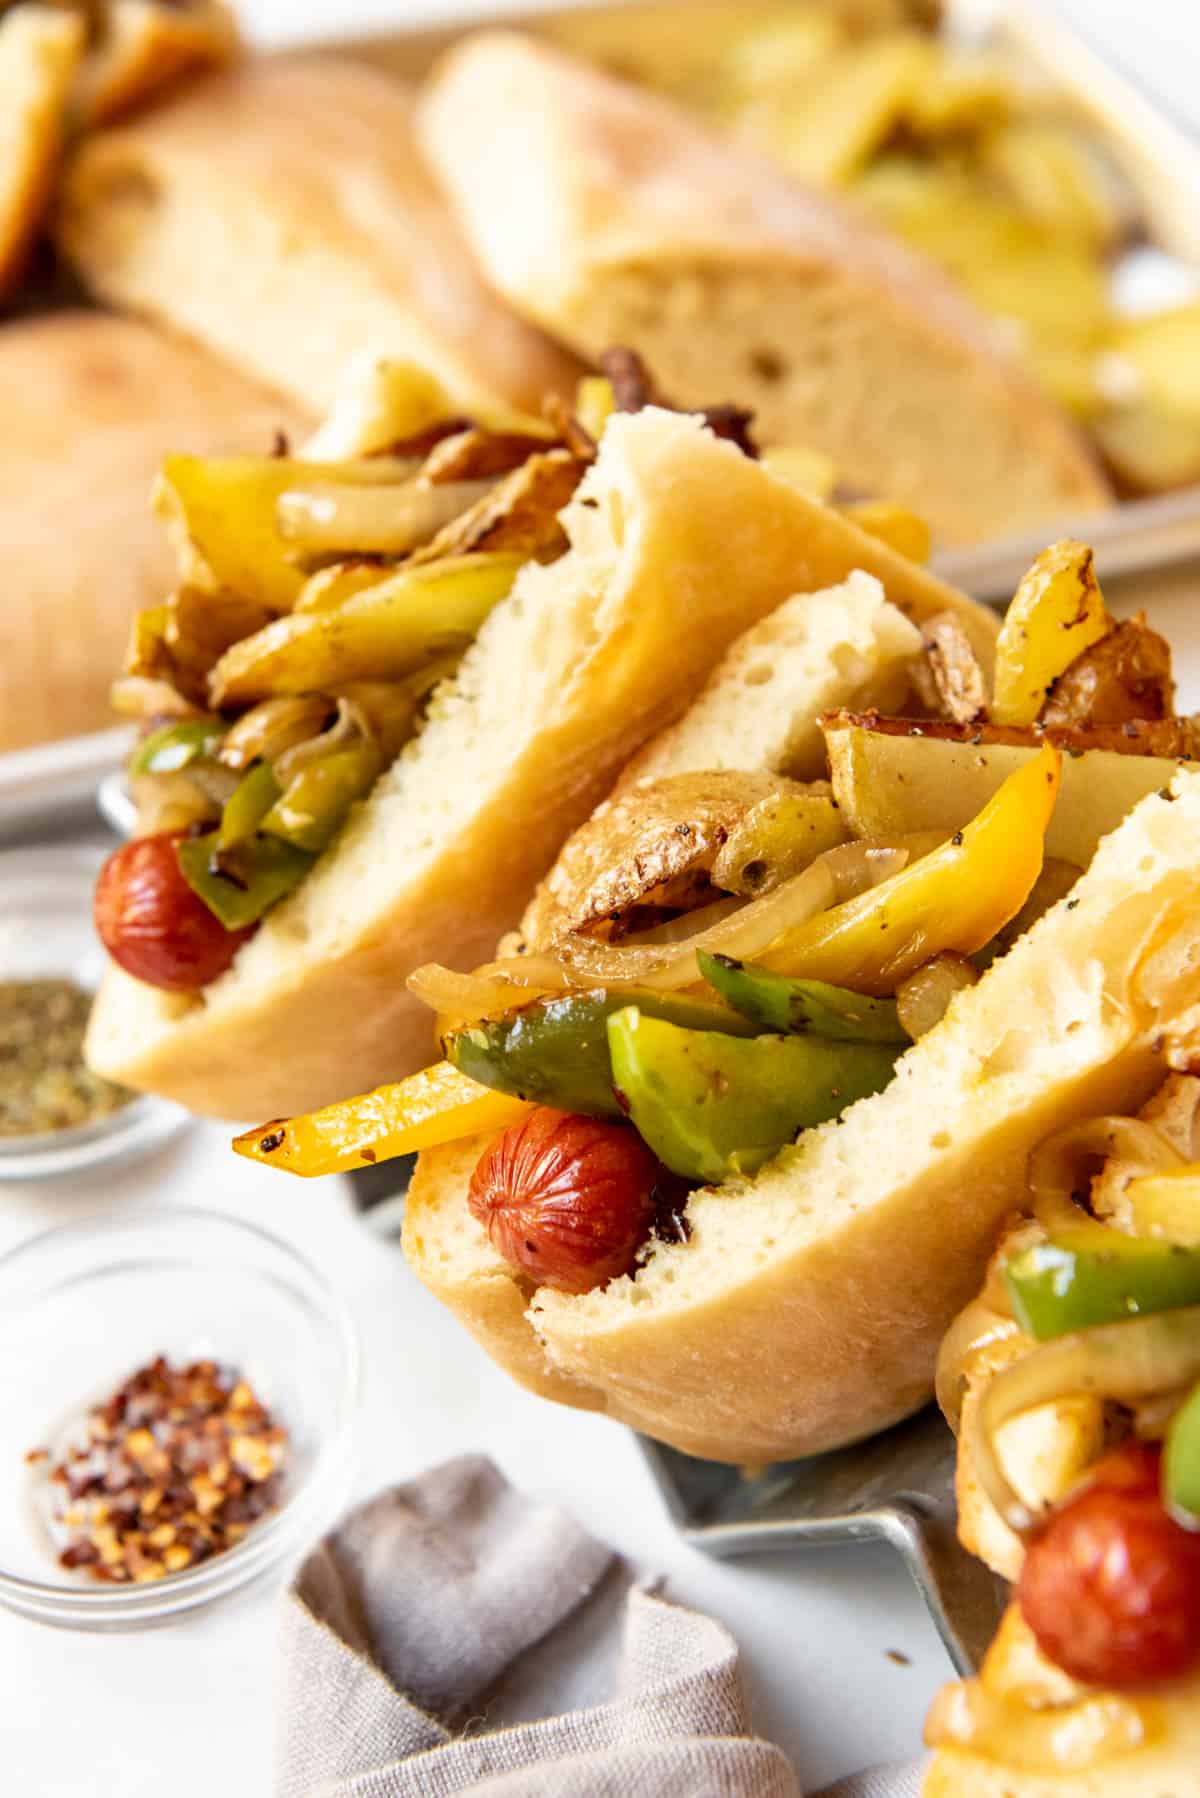 New Jersey Italian hot dogs in pizza bread with onions, peppers, and potatoes.